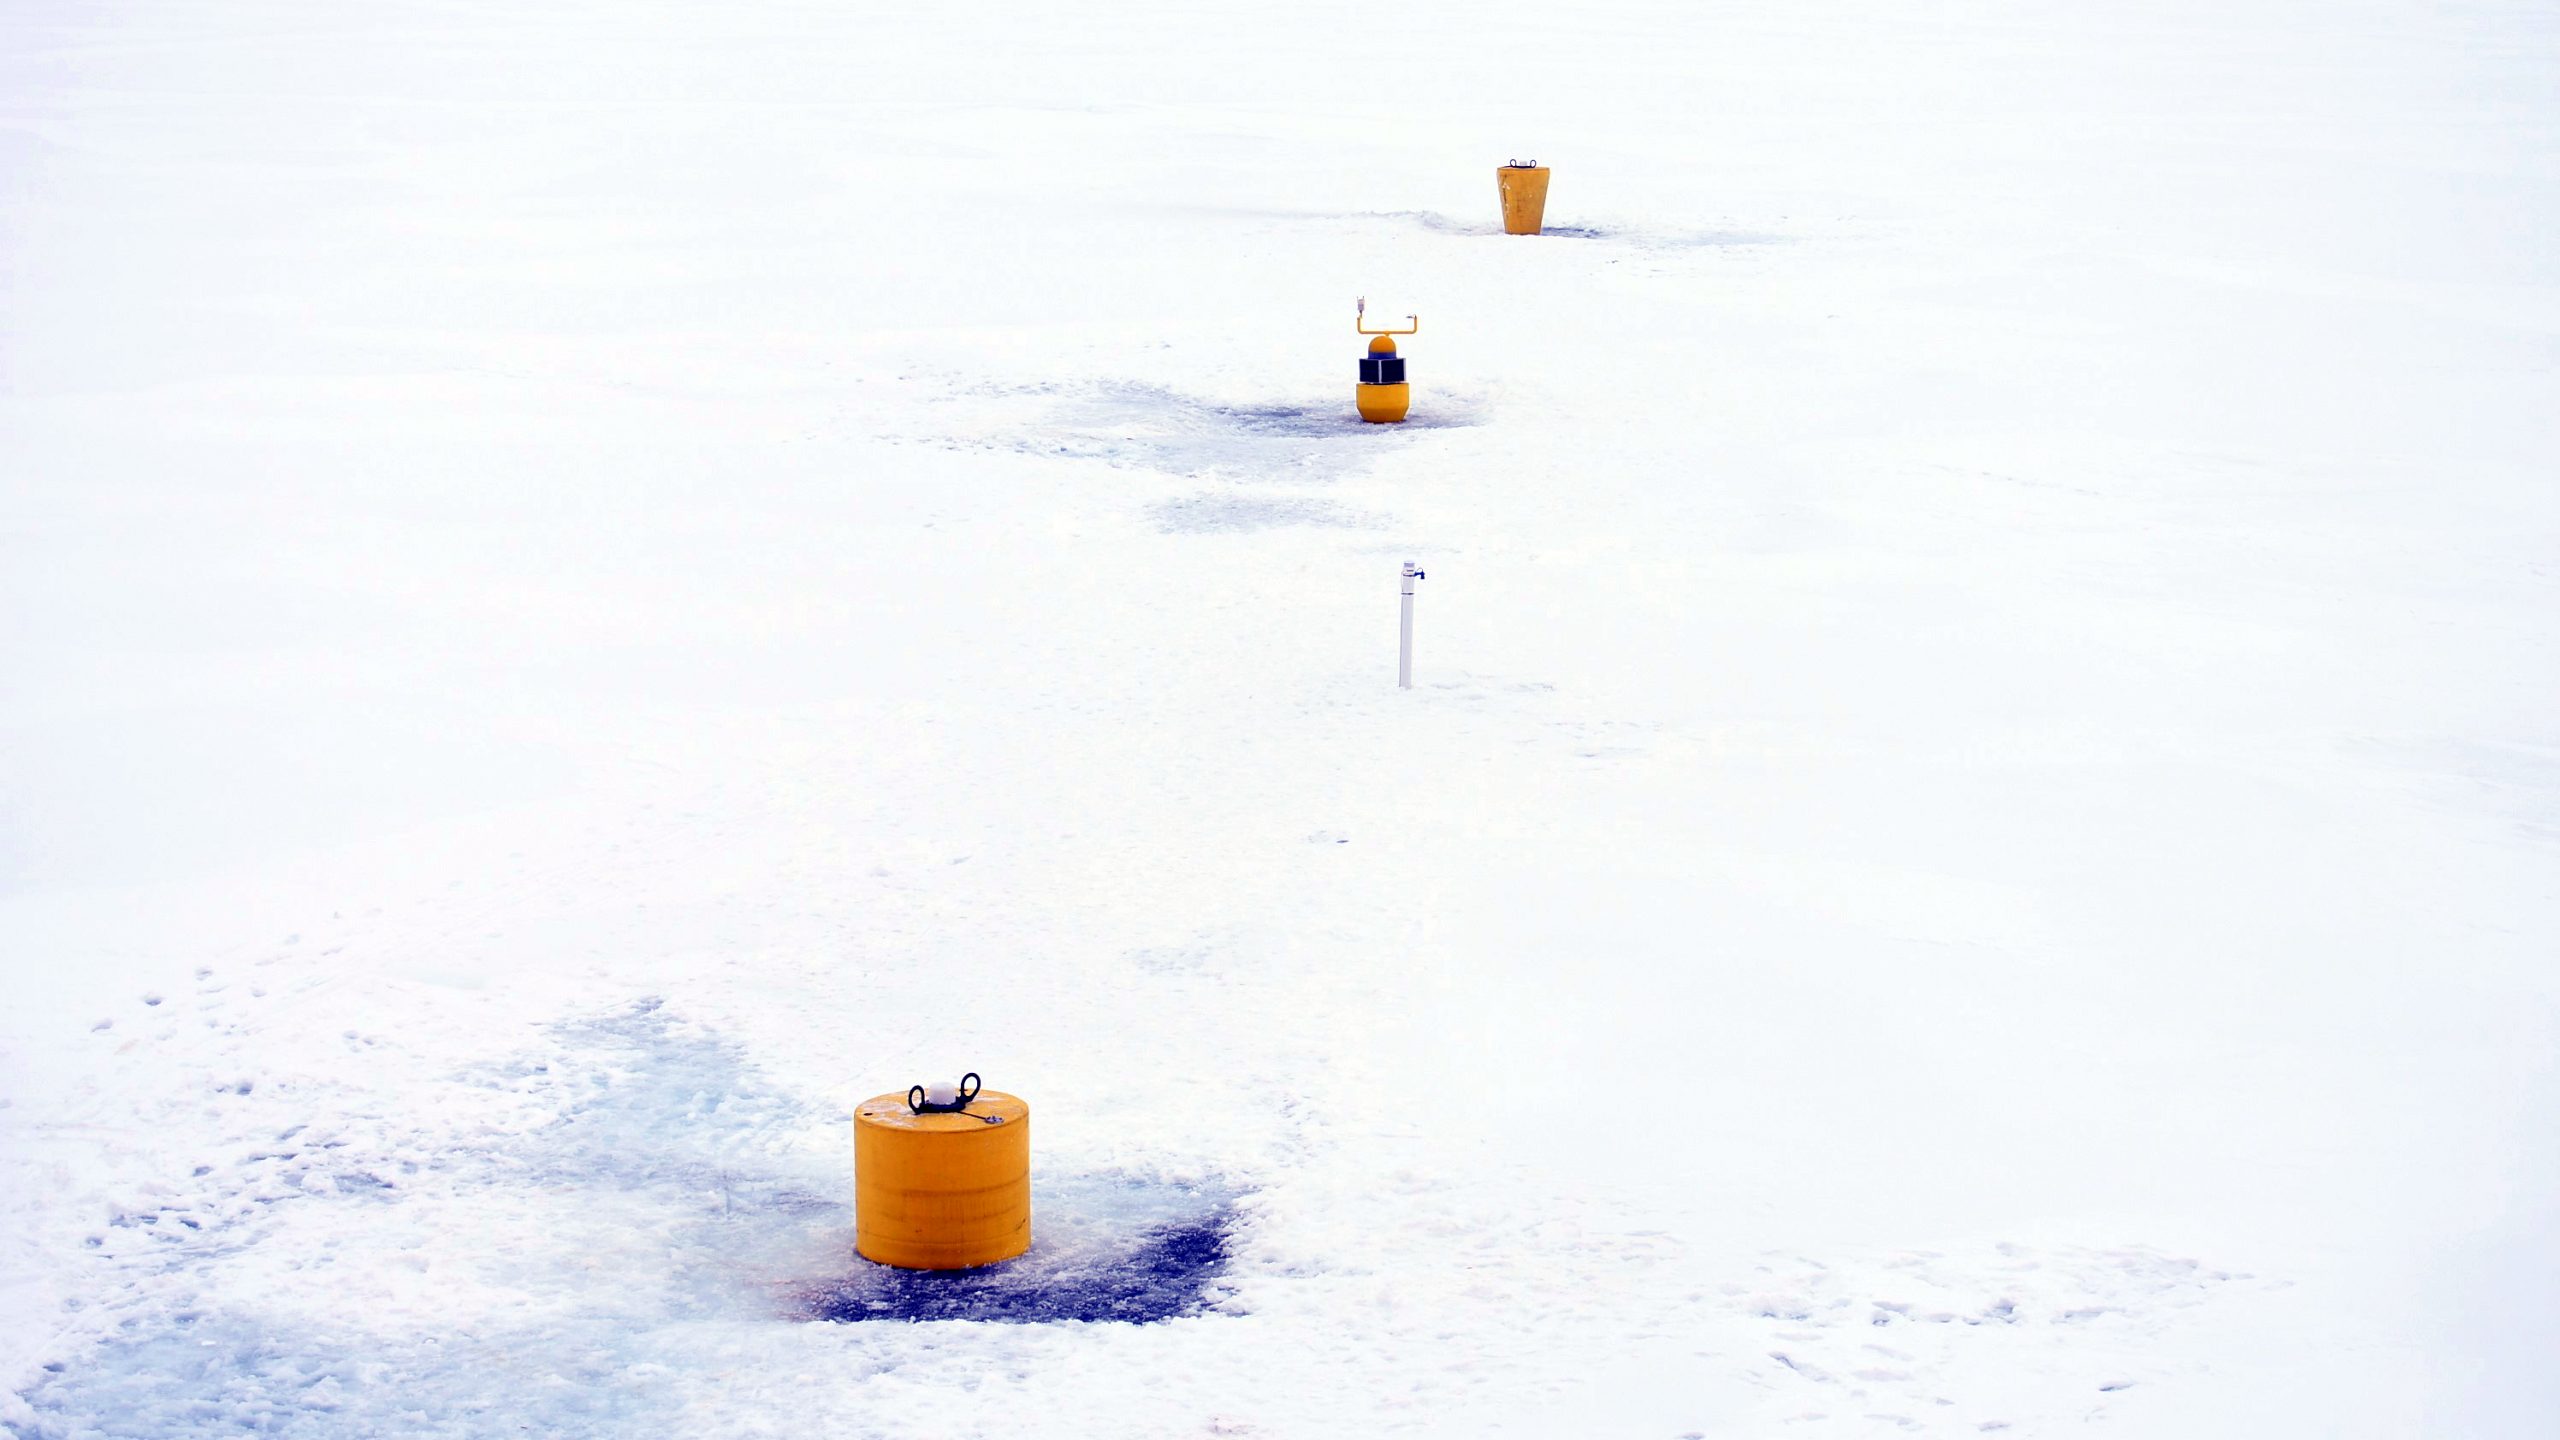 In-situ observations provided by the ITPs are invaluable for modeling studies of the Arctic Ocean. (Photo: Isabela Le Bras)